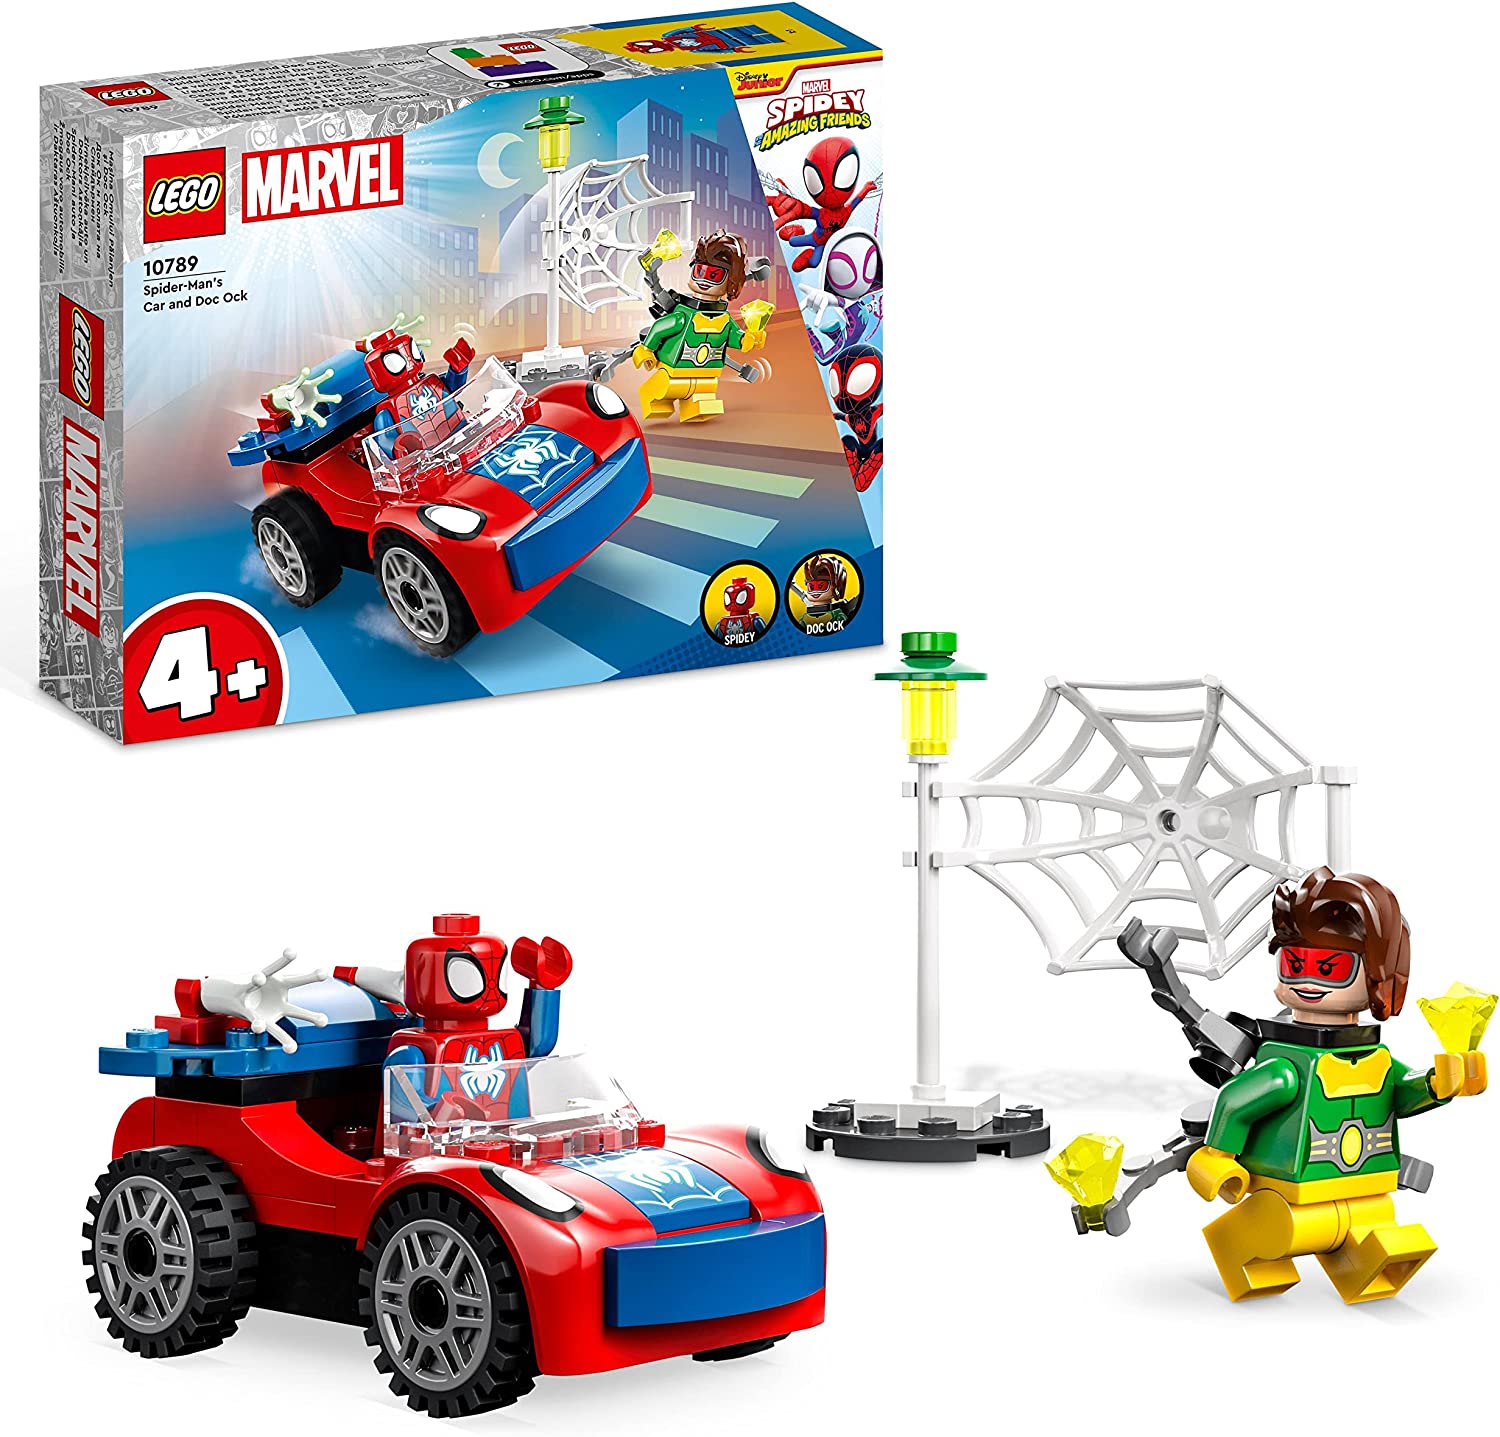 LEGO 10789 Marvel Spider-Mans Car and Doc Ock Set, Spidey and his Super Friends, Buildable Toy for Boys and Girls From 4 Years, with Glow in the Dark Parts